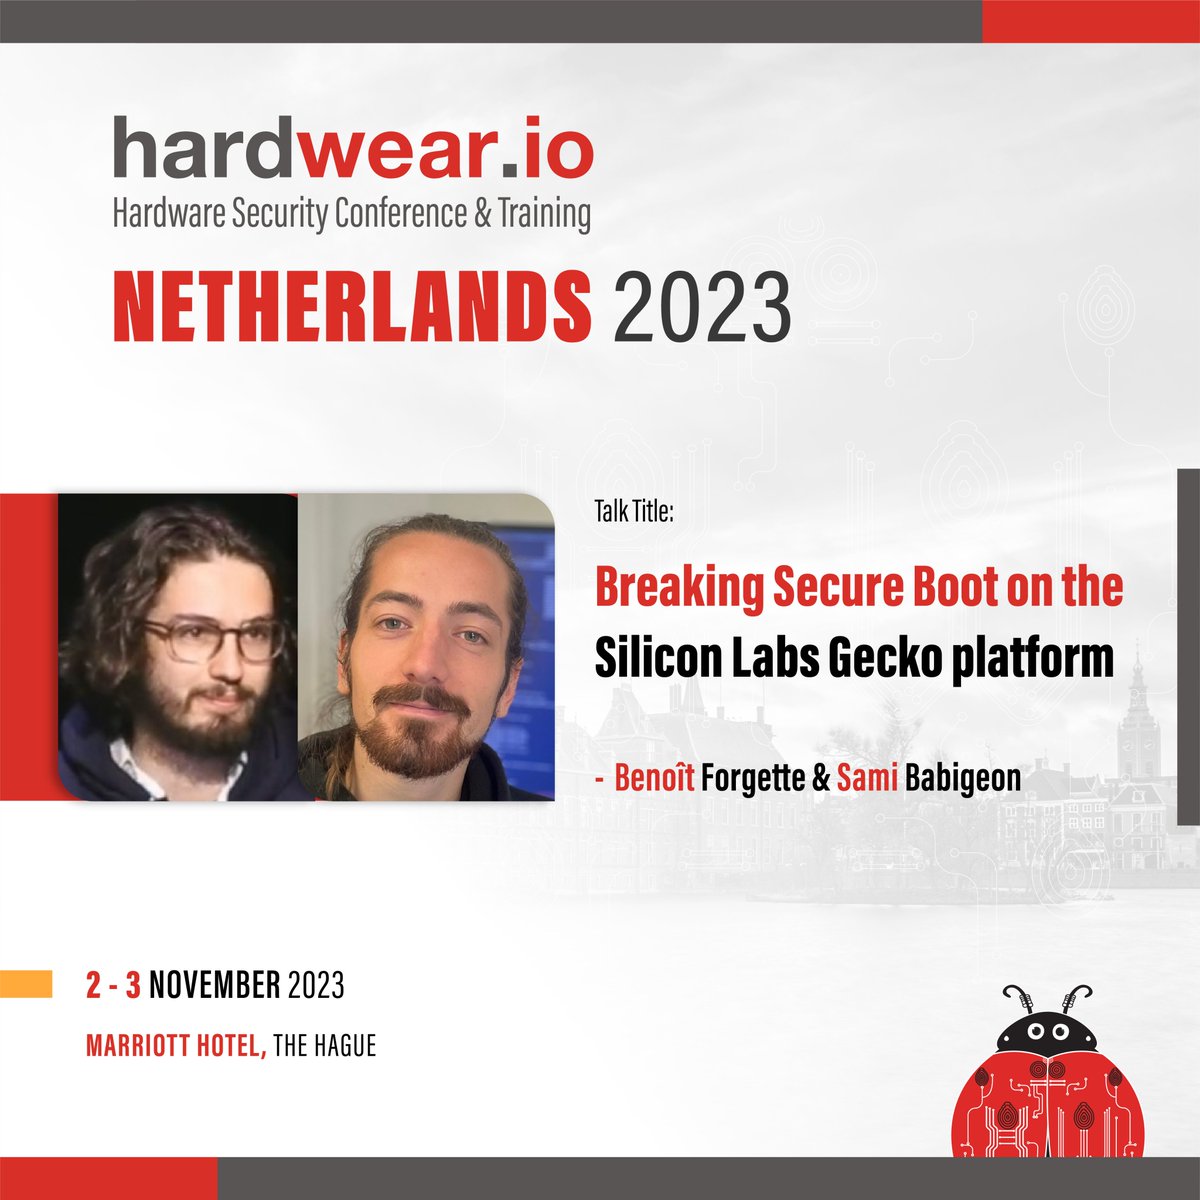 💽Secure boot bypassing on Gecko SDK 💡Benoît & Sami Babigeon will share detailed insights on the #vulnerability they discovered on Gecko SDK's OTA while looking at the code that is handling the parsing of the #firmware update Know more➡️bit.ly/3FfB9Cd #hw_ioNL2023